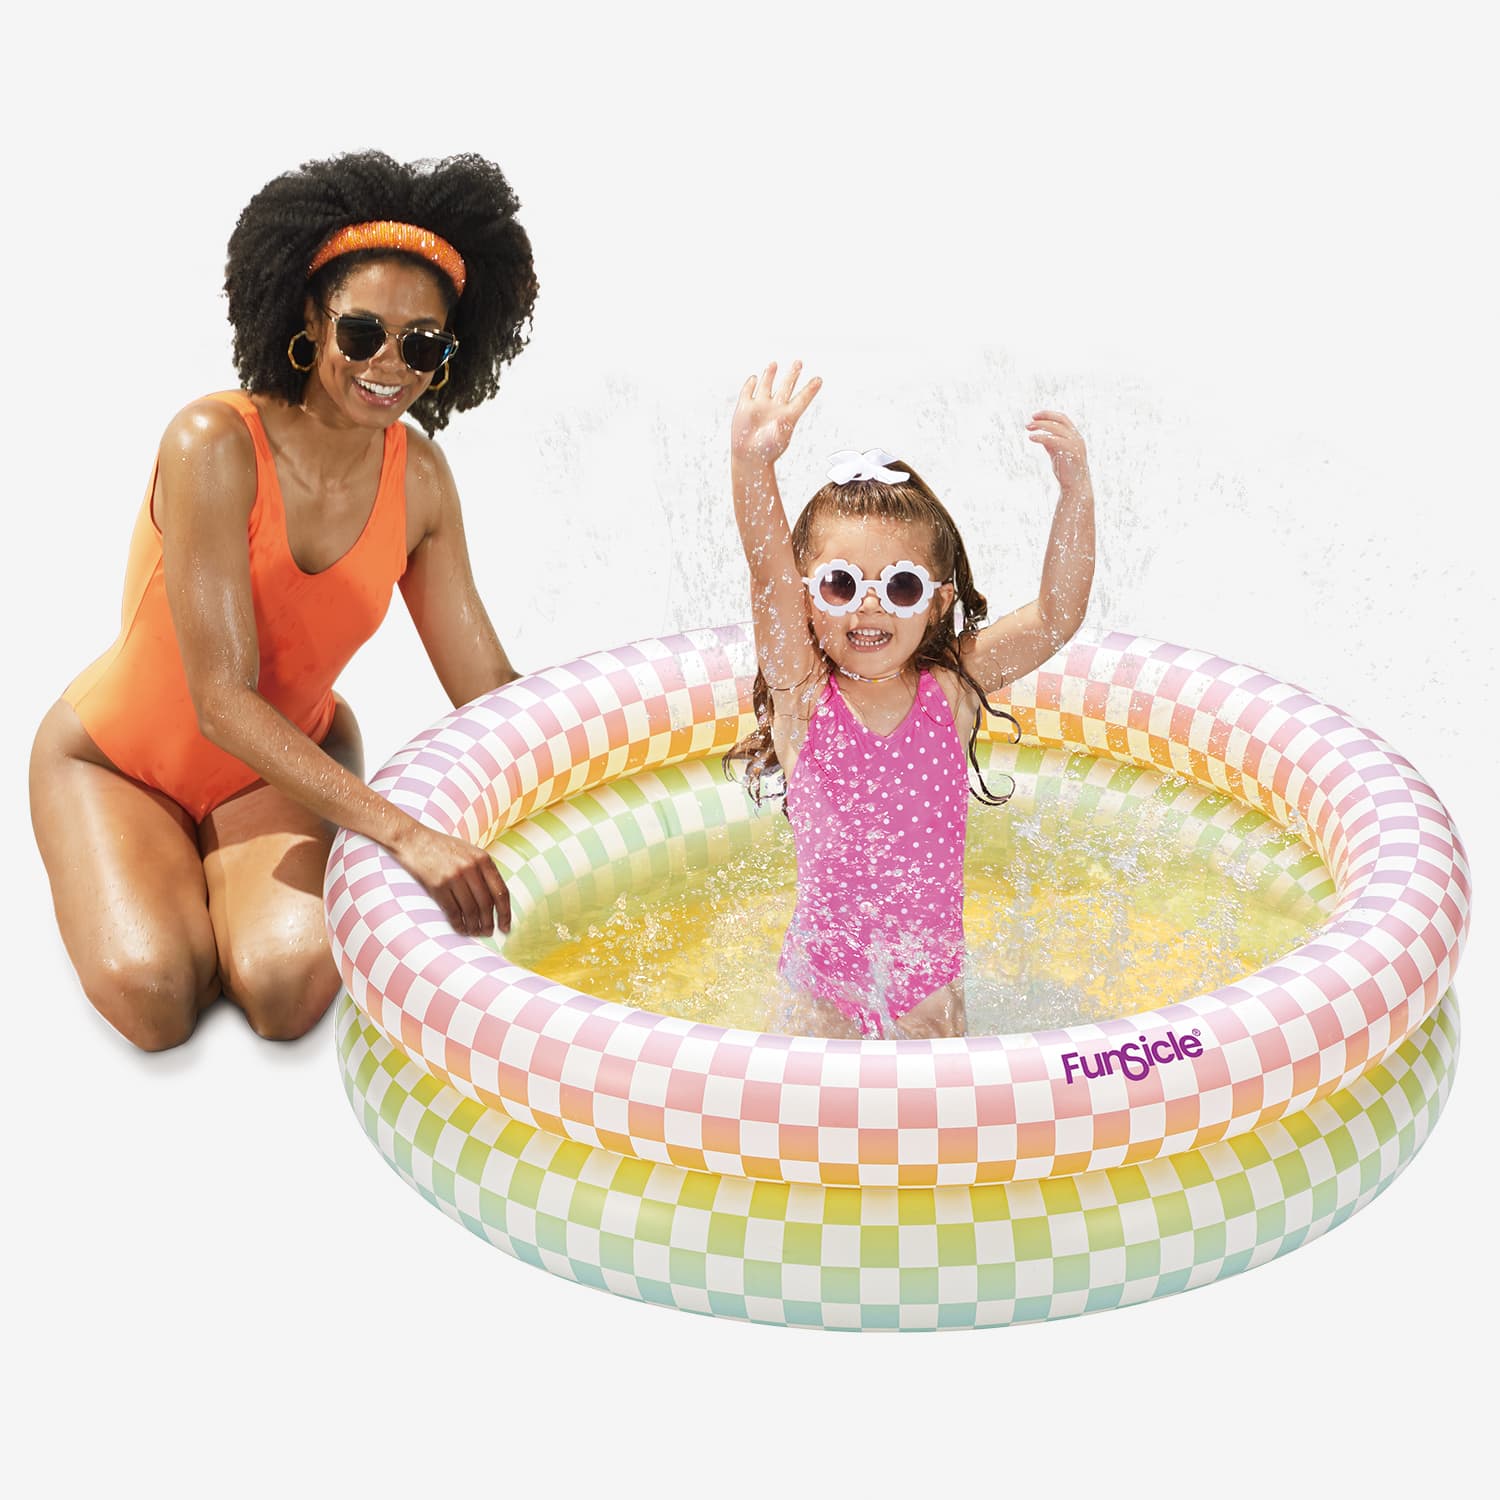 Funsicle Rainbow Checkered Pool with people on light background